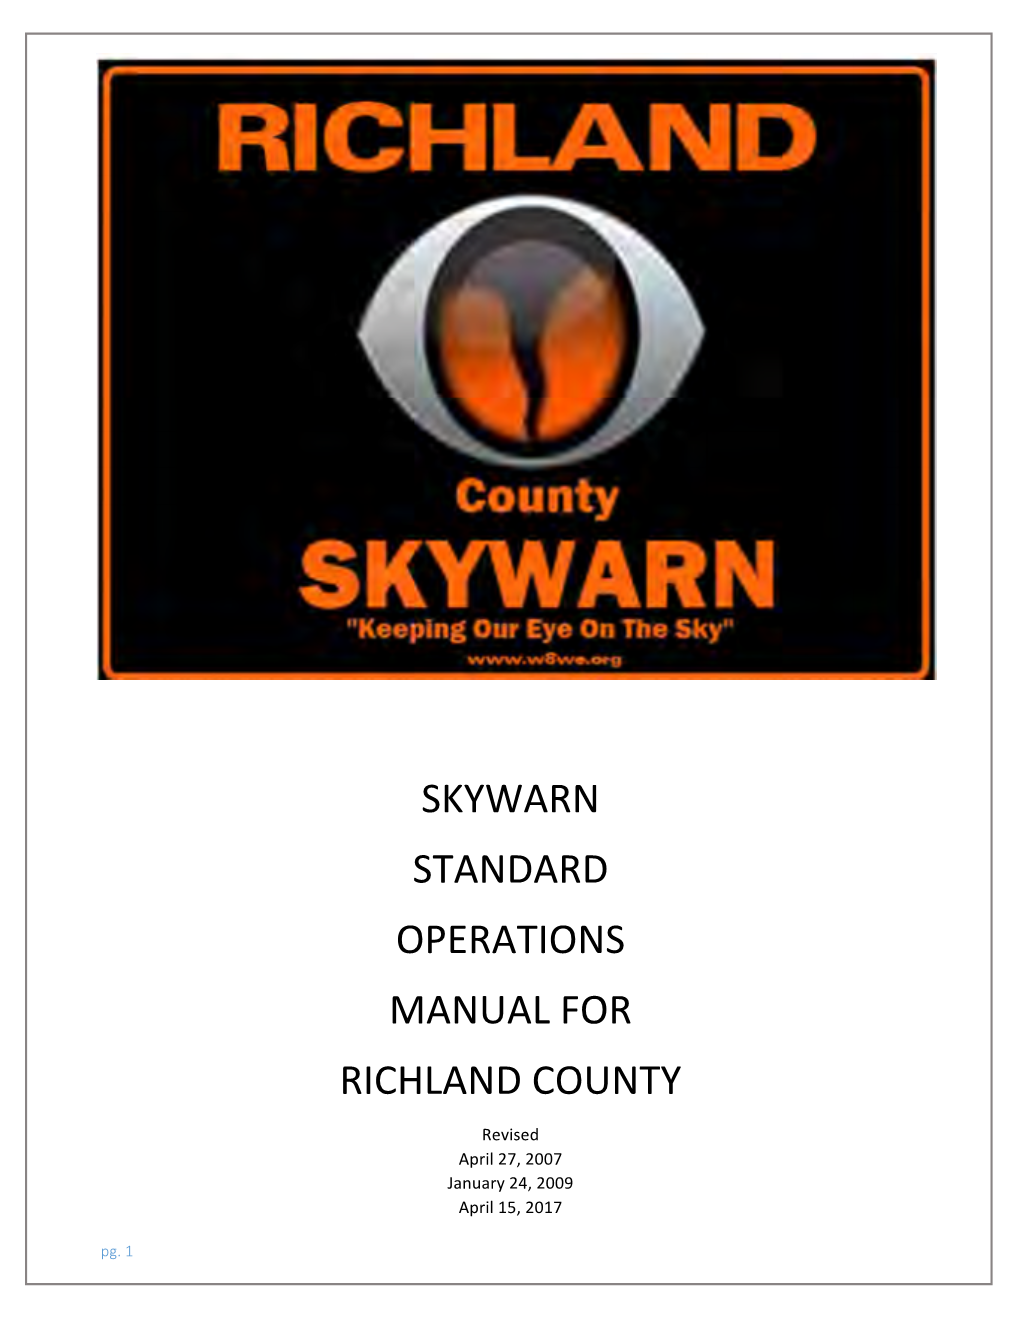 Skywarn Standard Operations Manual for Richland County